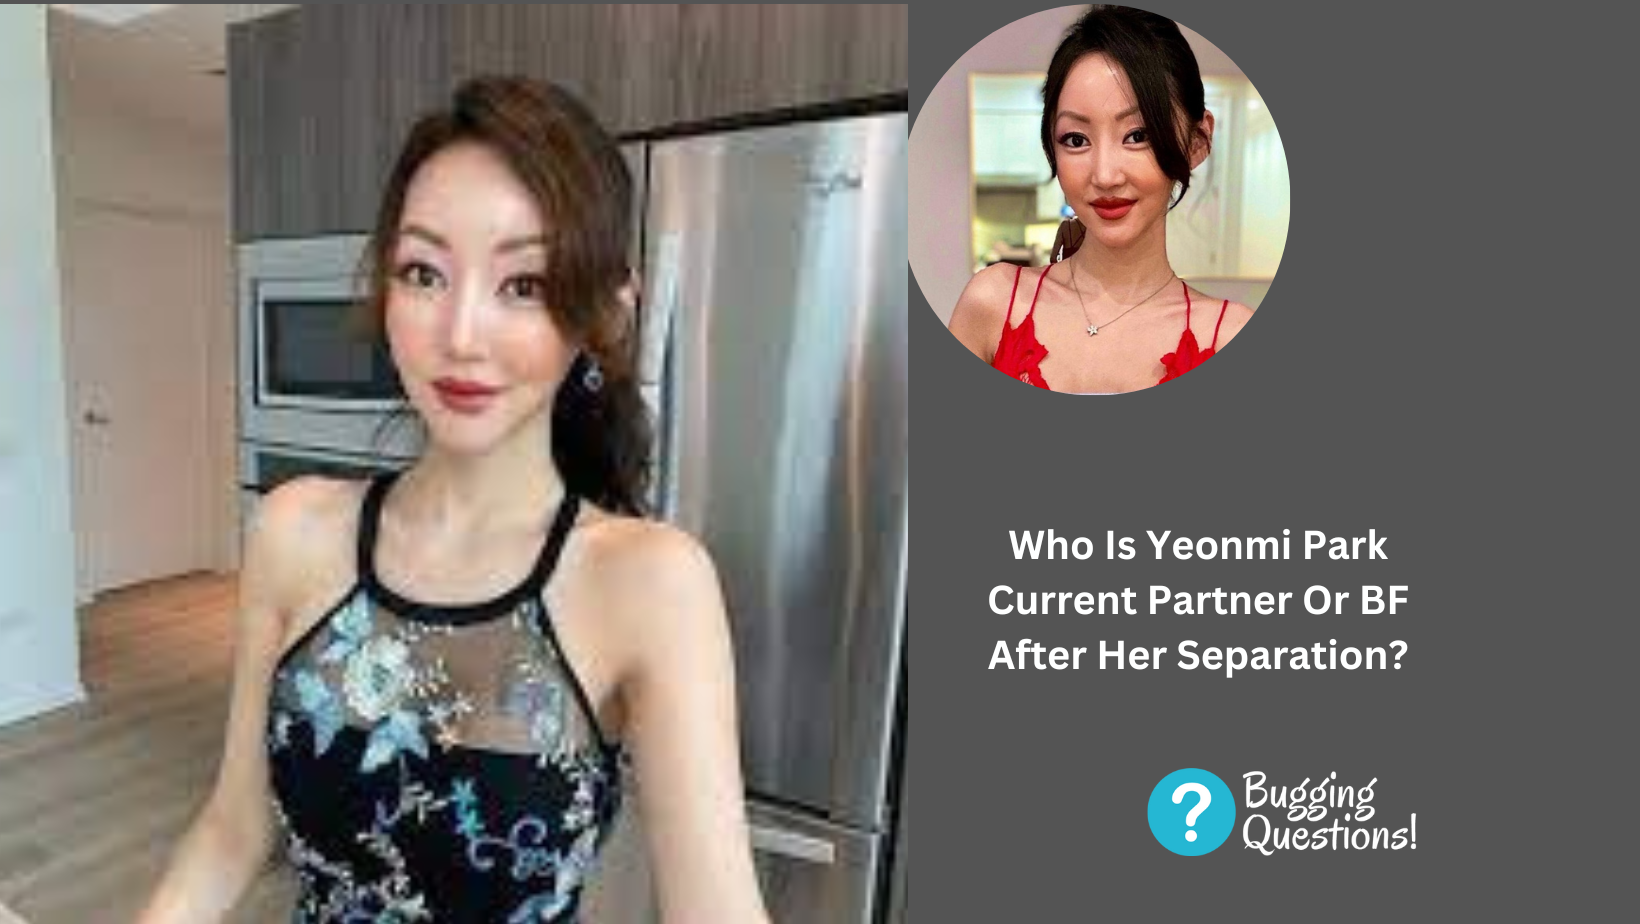 Who Is Yeonmi Park Current Partner Or BF After Her Separation?